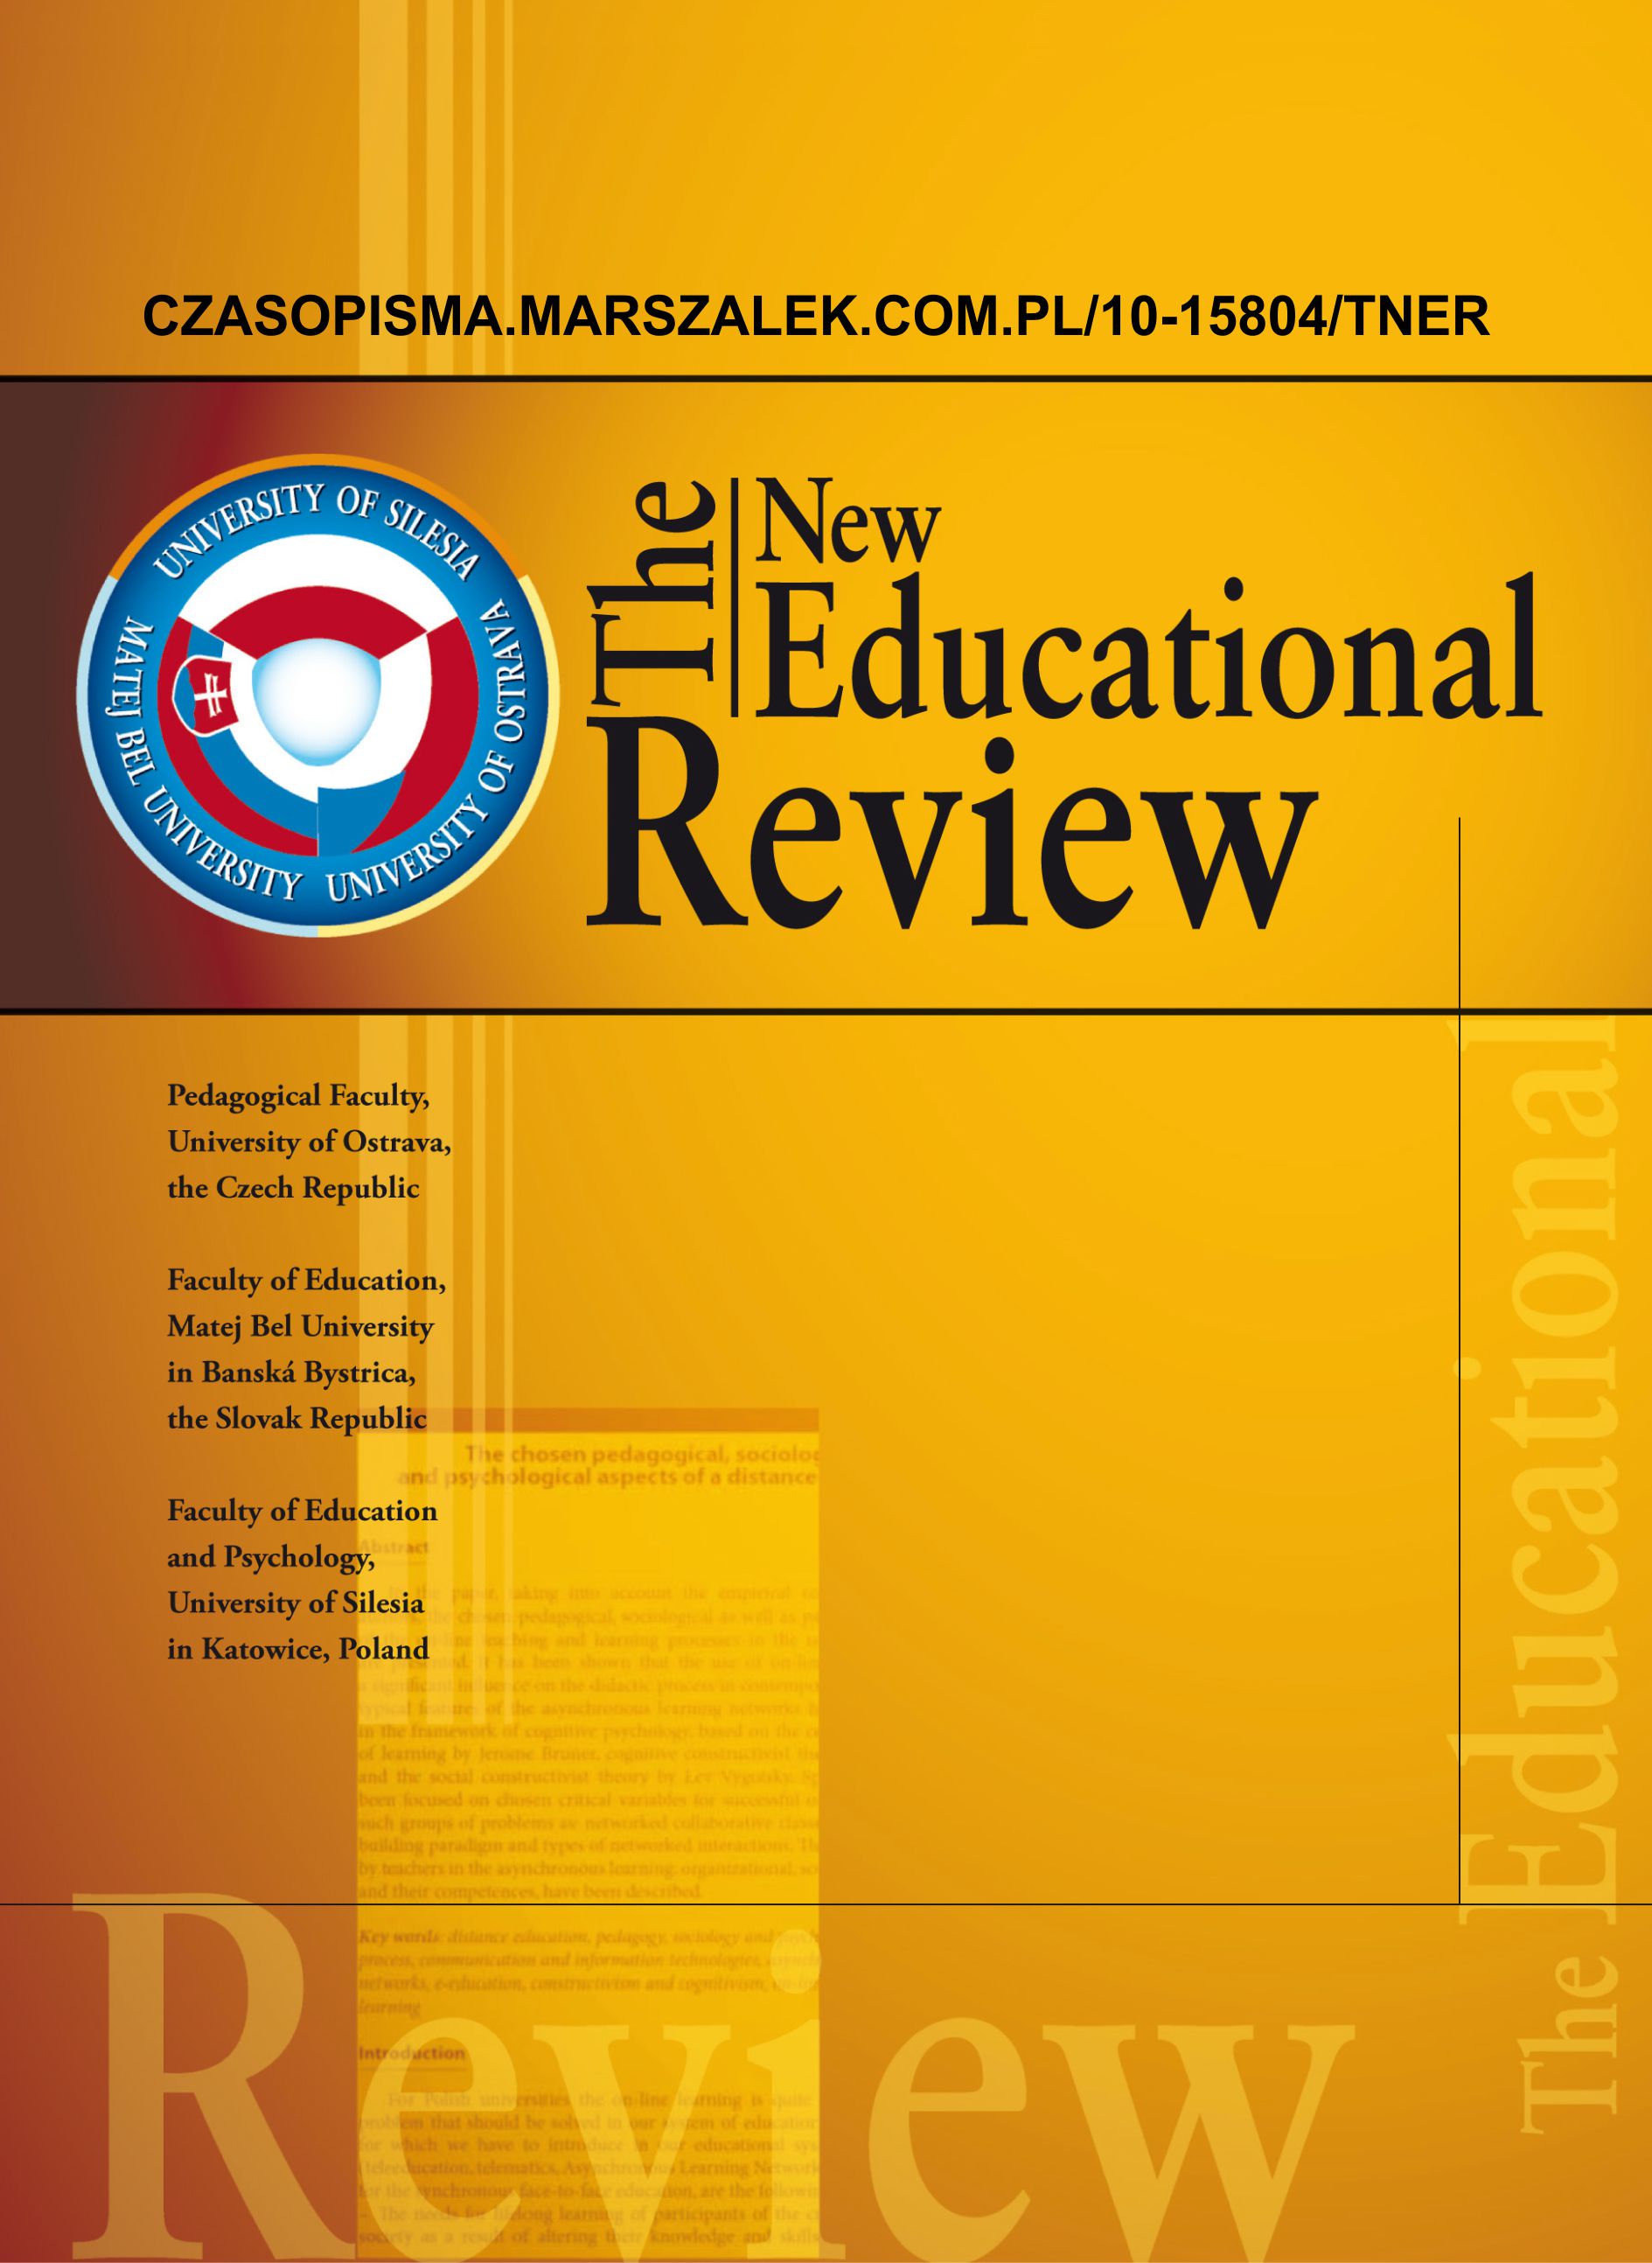 Teachers’ Attitudes towards Evaluation Research and Their Identity Processing Styles Cover Image